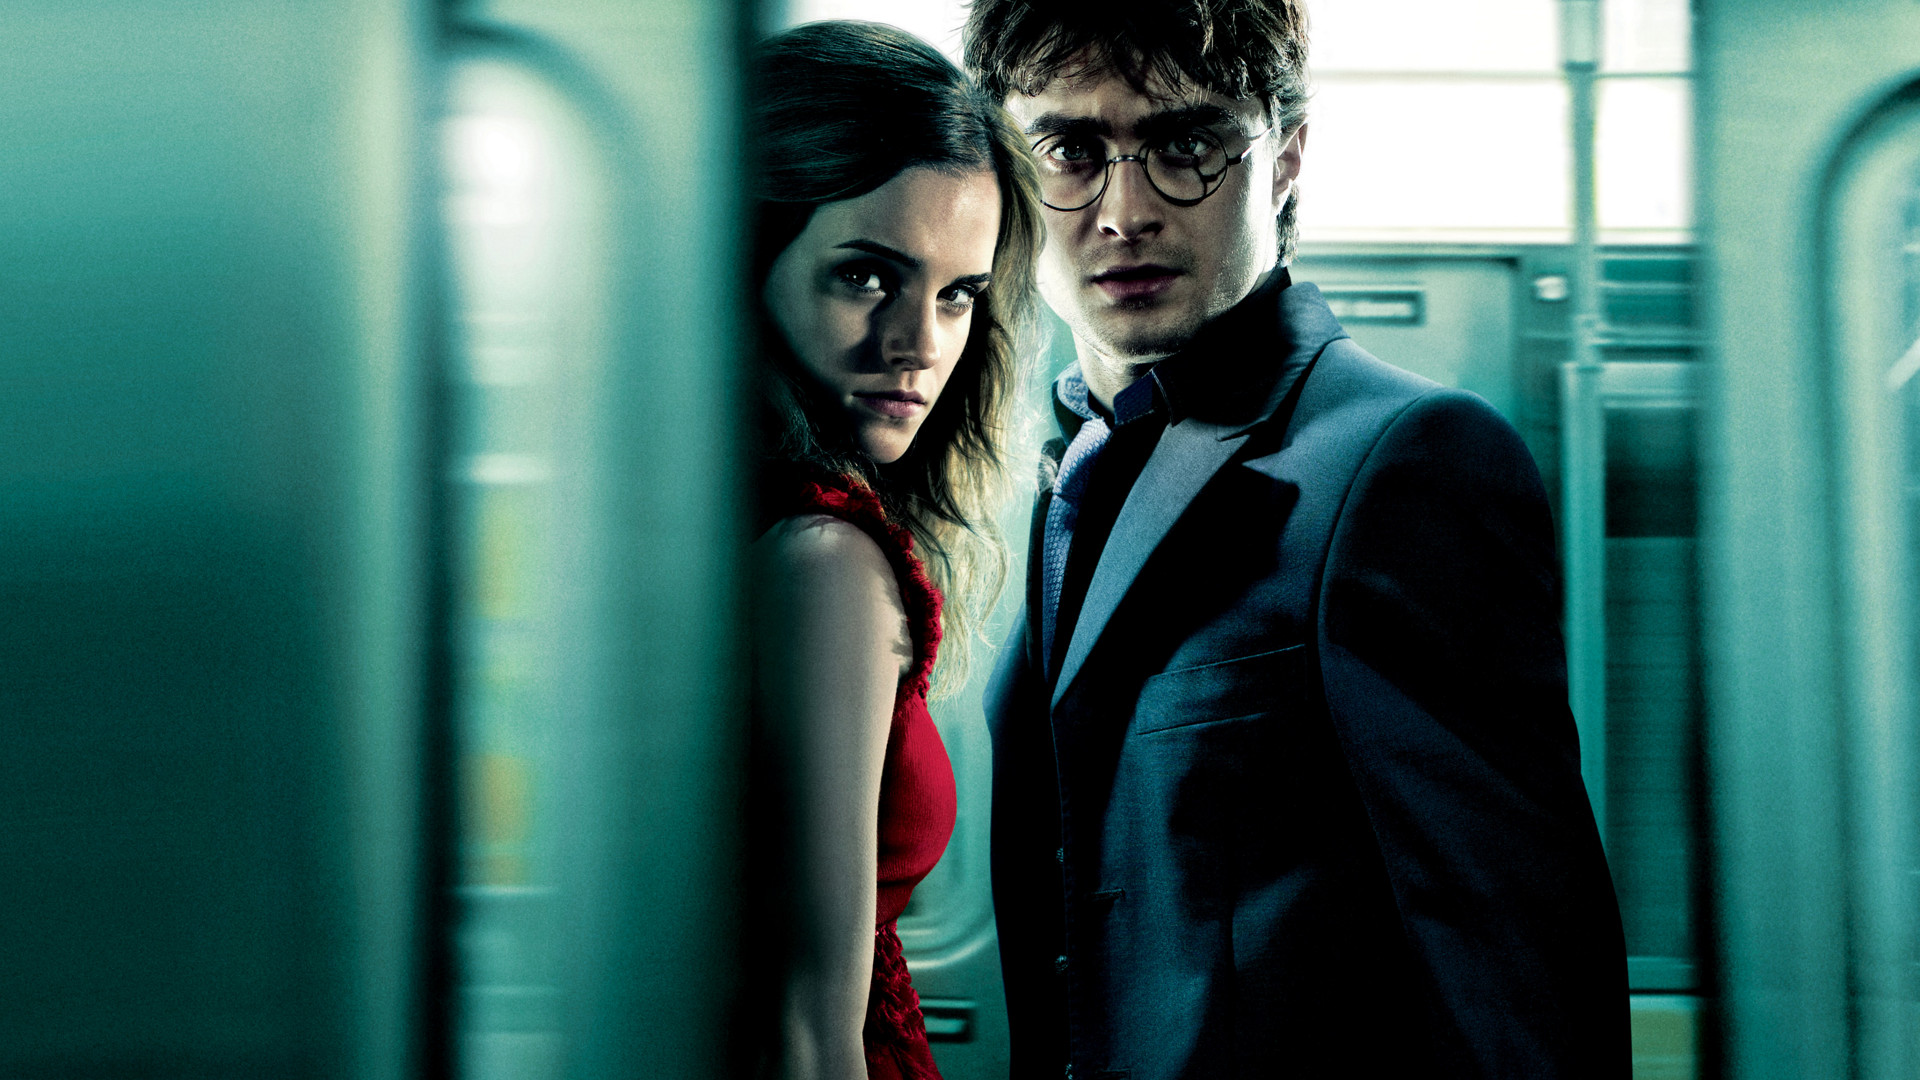 hermione granger, harry potter, movie, harry potter and the deathly hallows: part 1, daniel radcliffe, emma watson